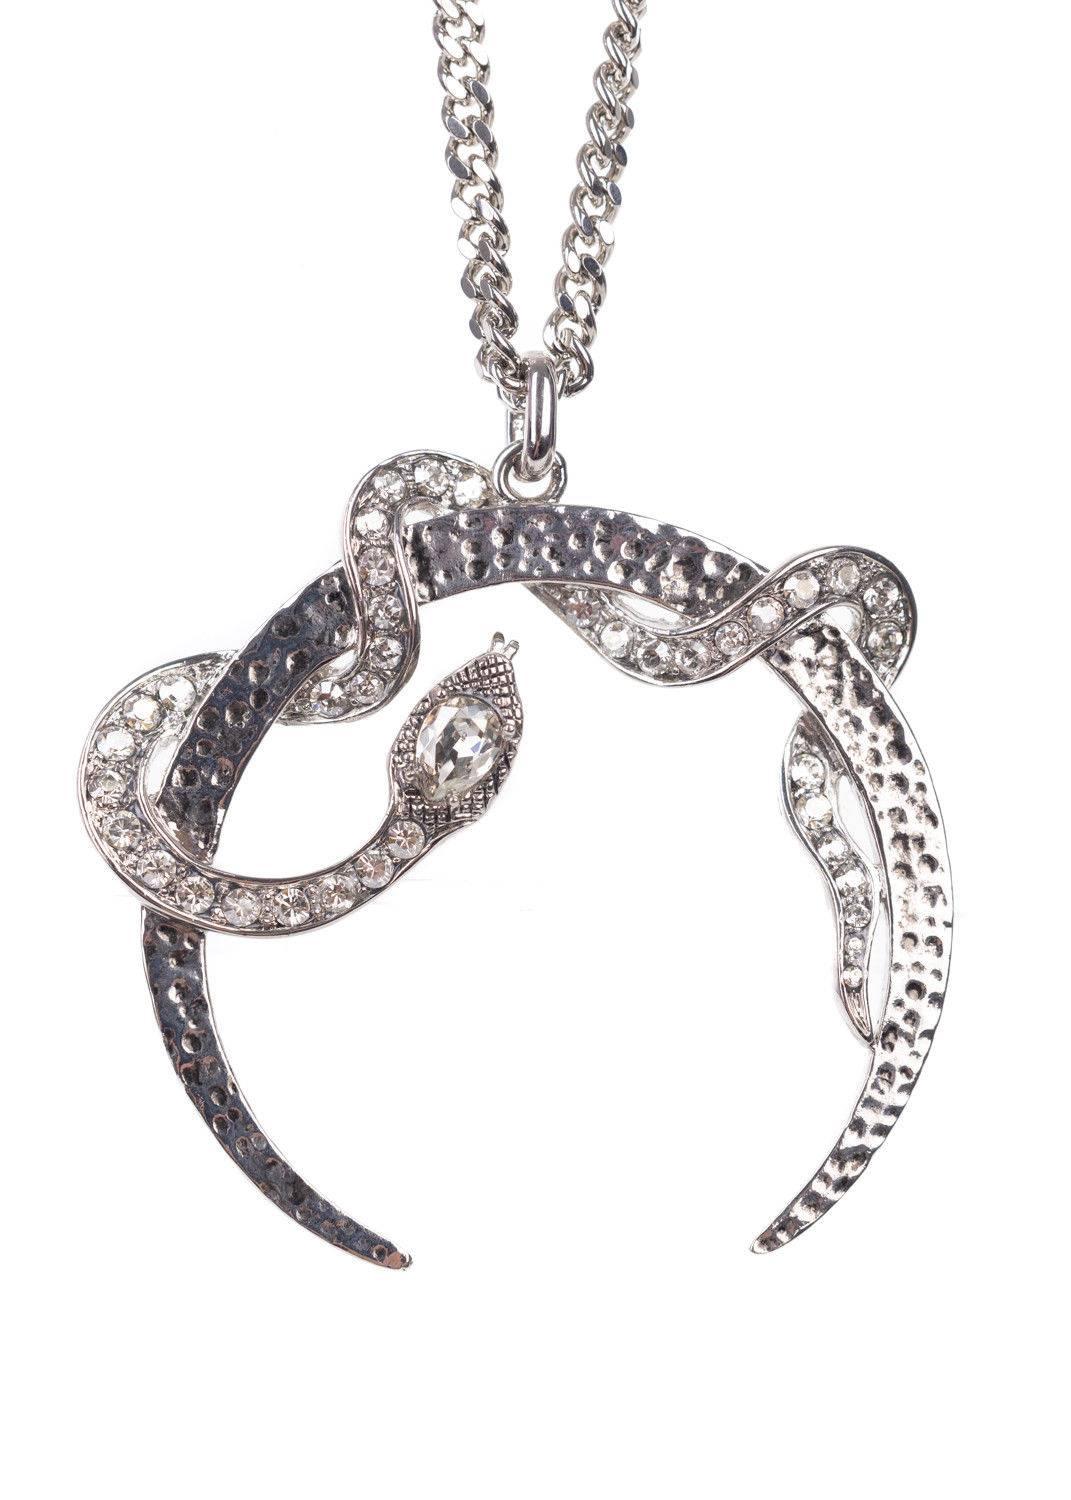 Roberto Cavalli silver plated necklace. This necklace features a half moon design with a swarovski encrusted serpent. This necklace is great to pair with a deep v neckline silhouette for a statemented chic look.

 

Brass and Swarovski